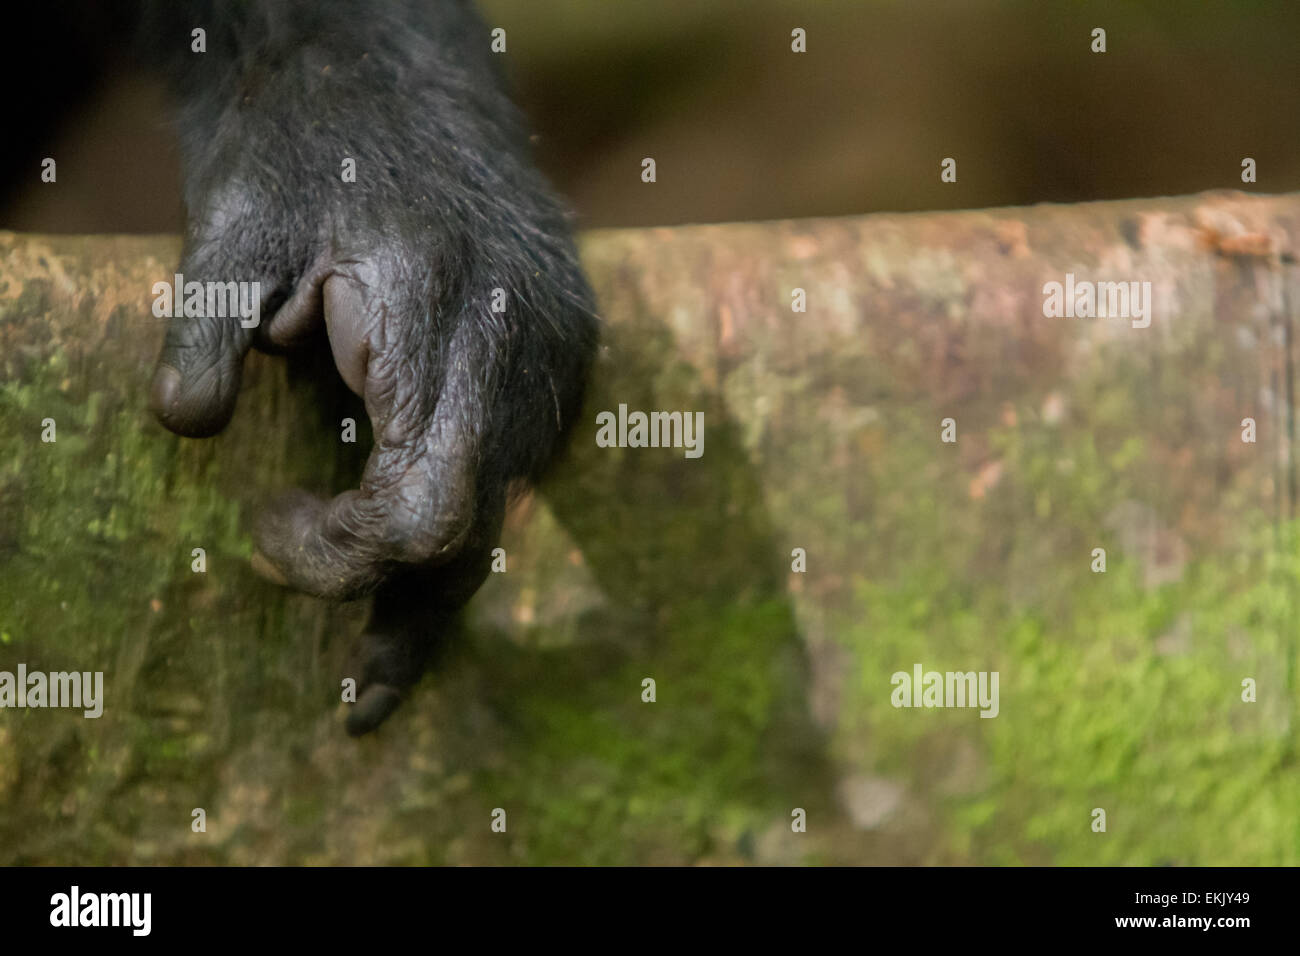 Hand of a Sulawesi black-crested macaque (Macaca nigra) in Tangkoko Nature Reserve, Indonesia. Its forefinger has lost, stumped by poacher's snare. Stock Photo